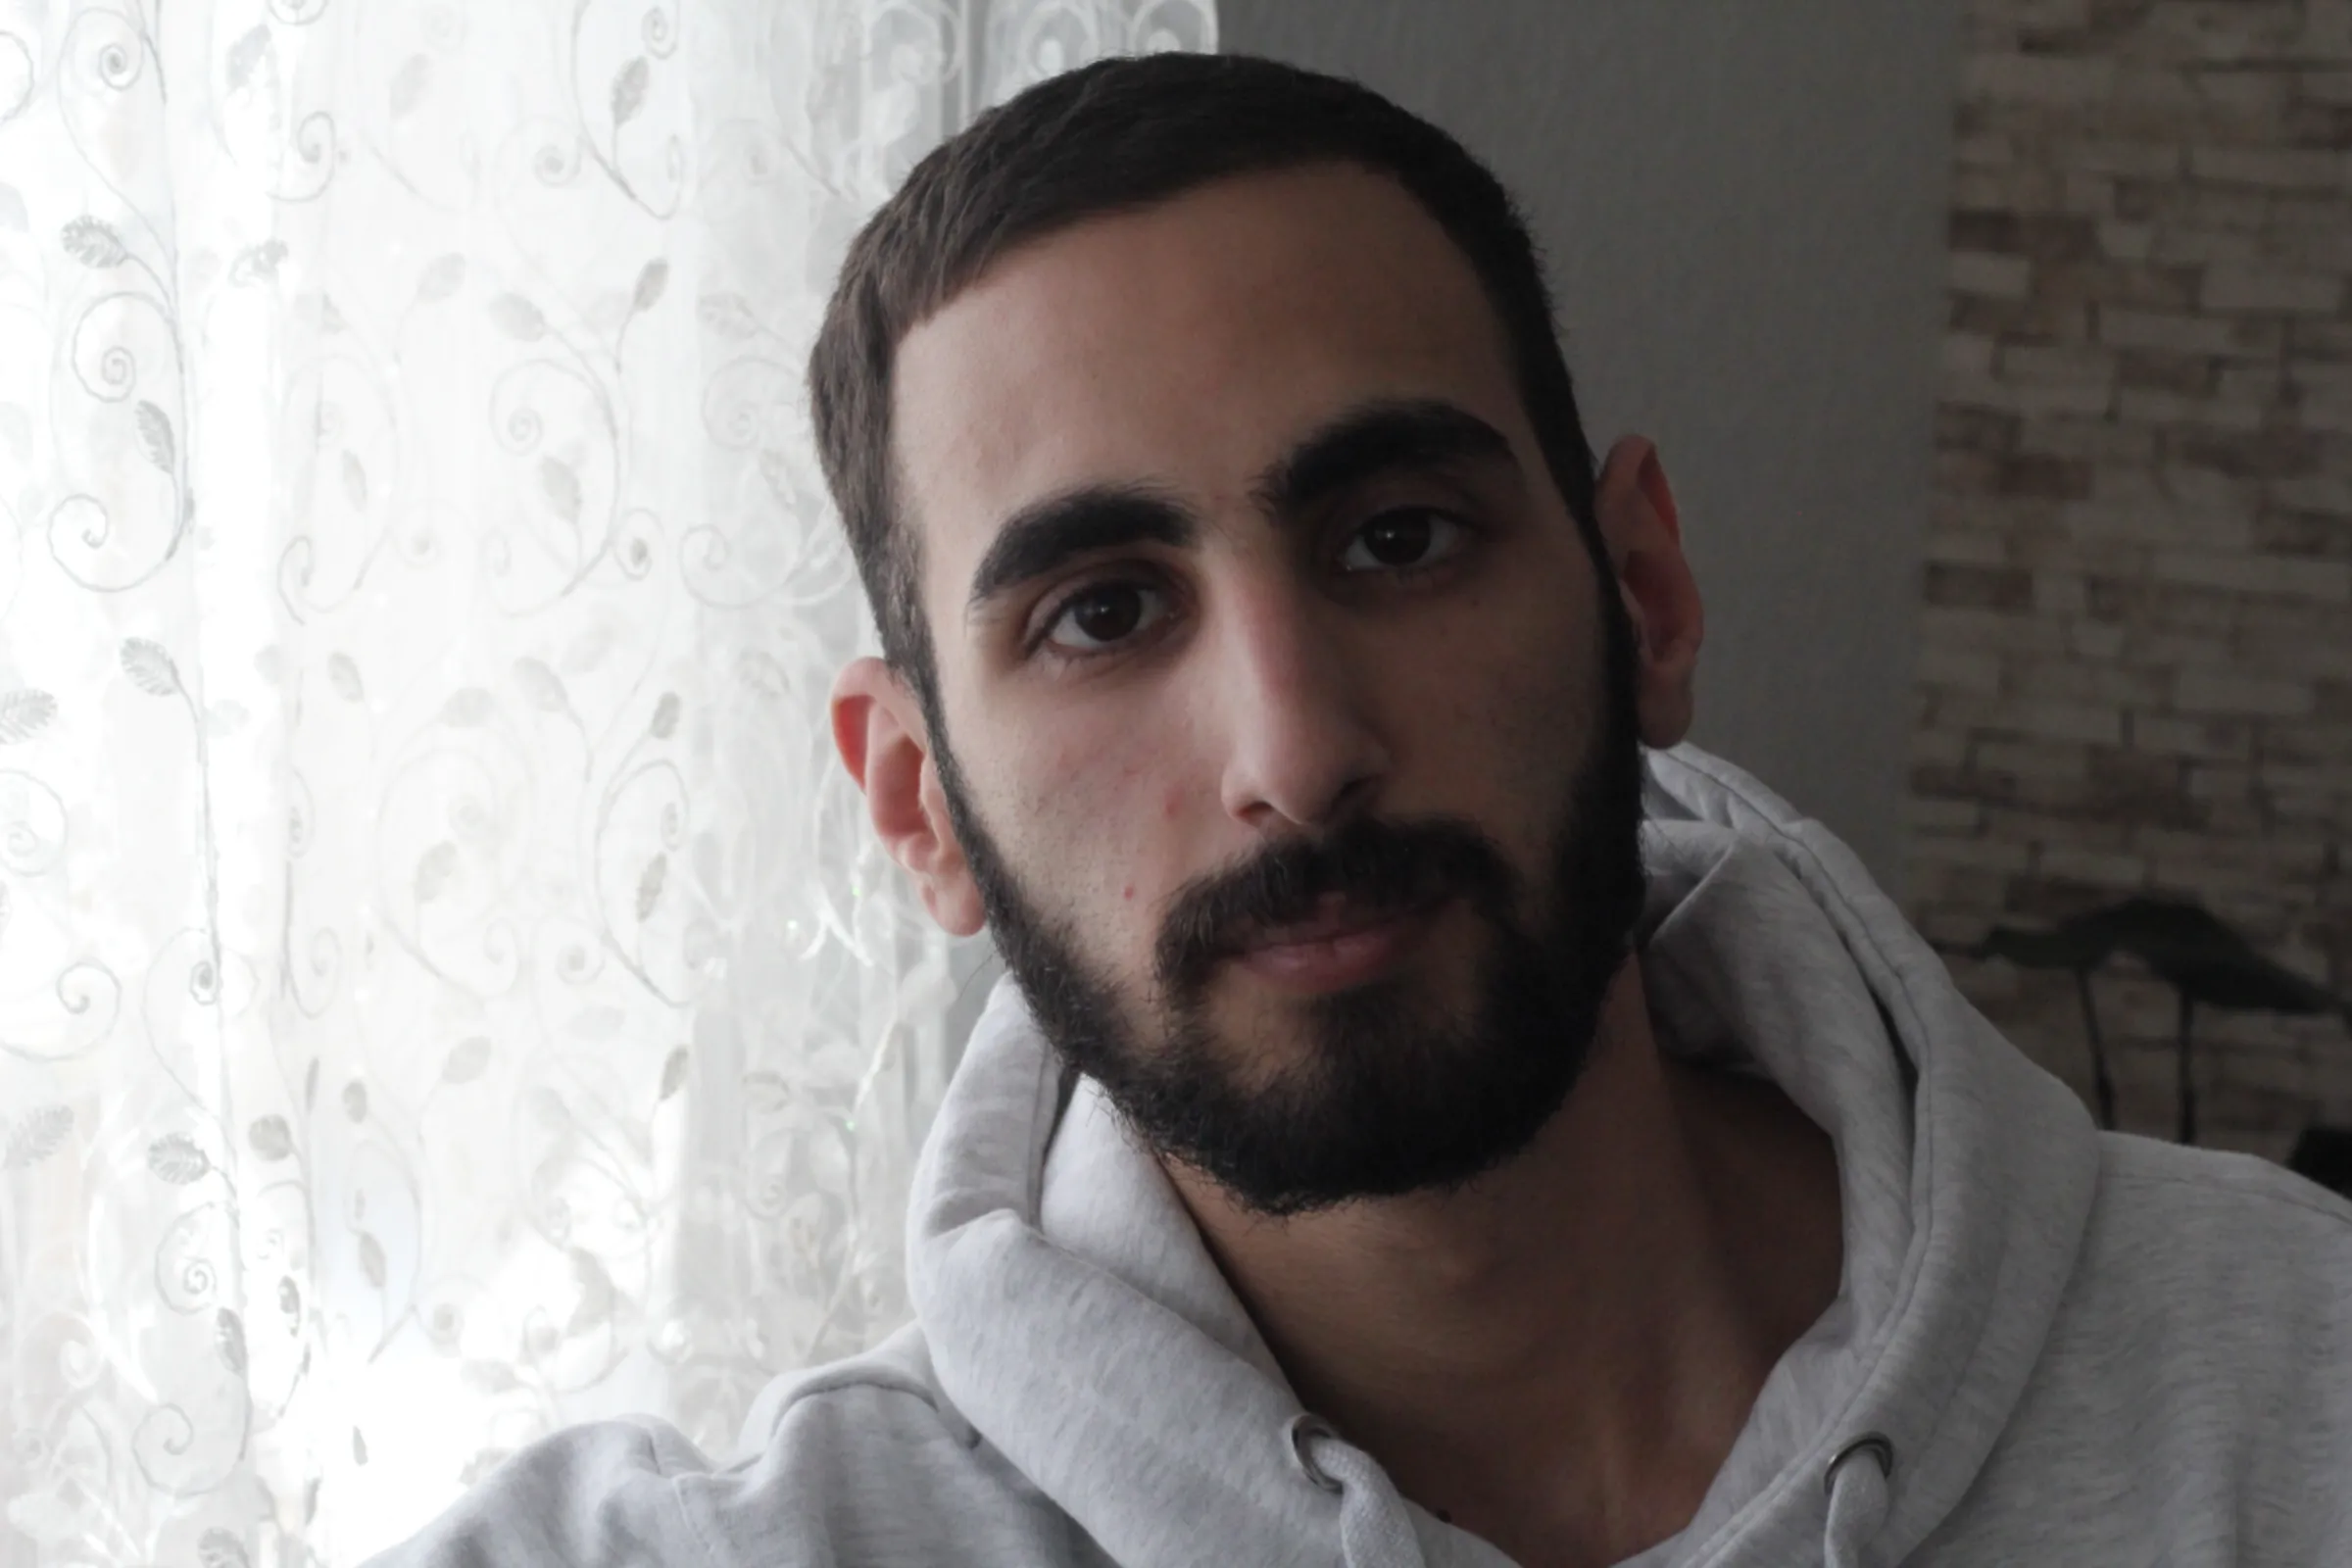 Mahmoud Almohamad, a Syrian refugee and medical student at Aalborg University, at his parents' home in Brønderslev, Denmark. March 2023